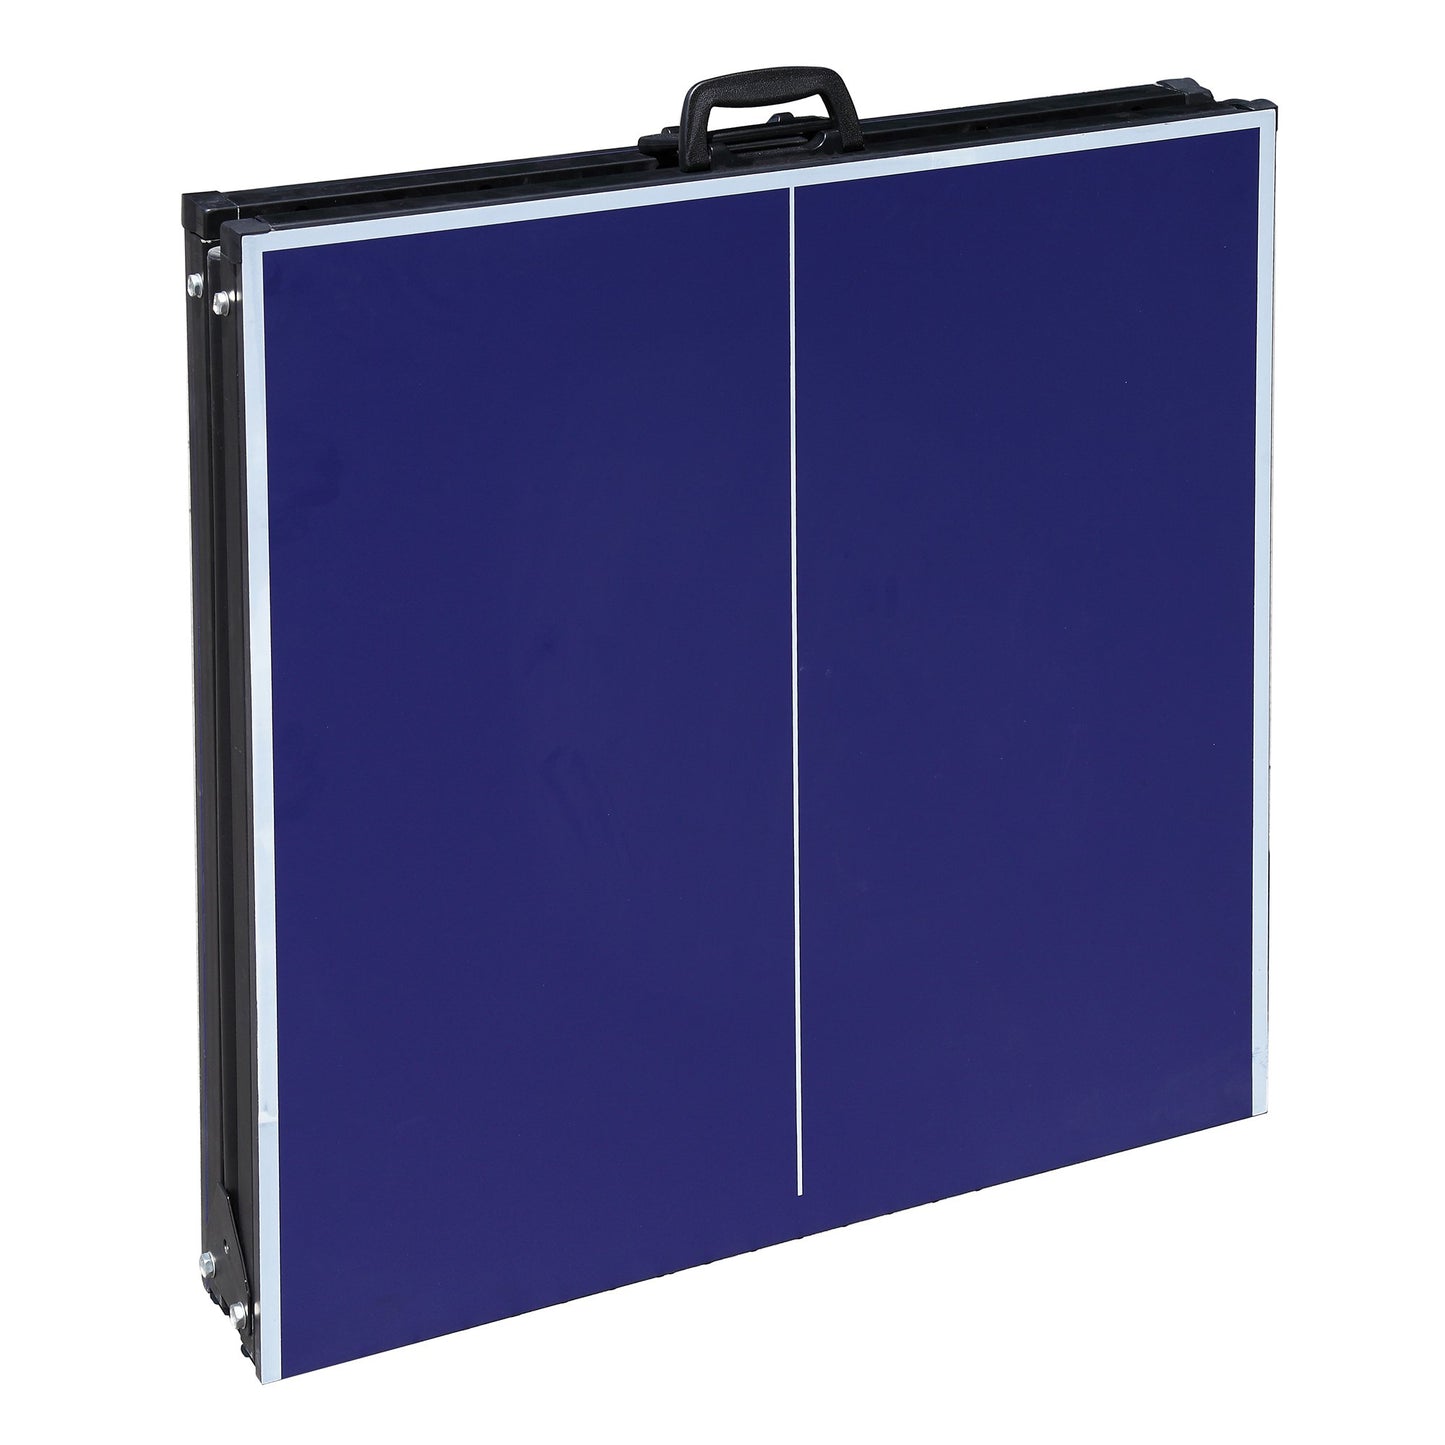 Hathaway Crossover 5ft Portable Ping Pong Table - Gaming Blaze